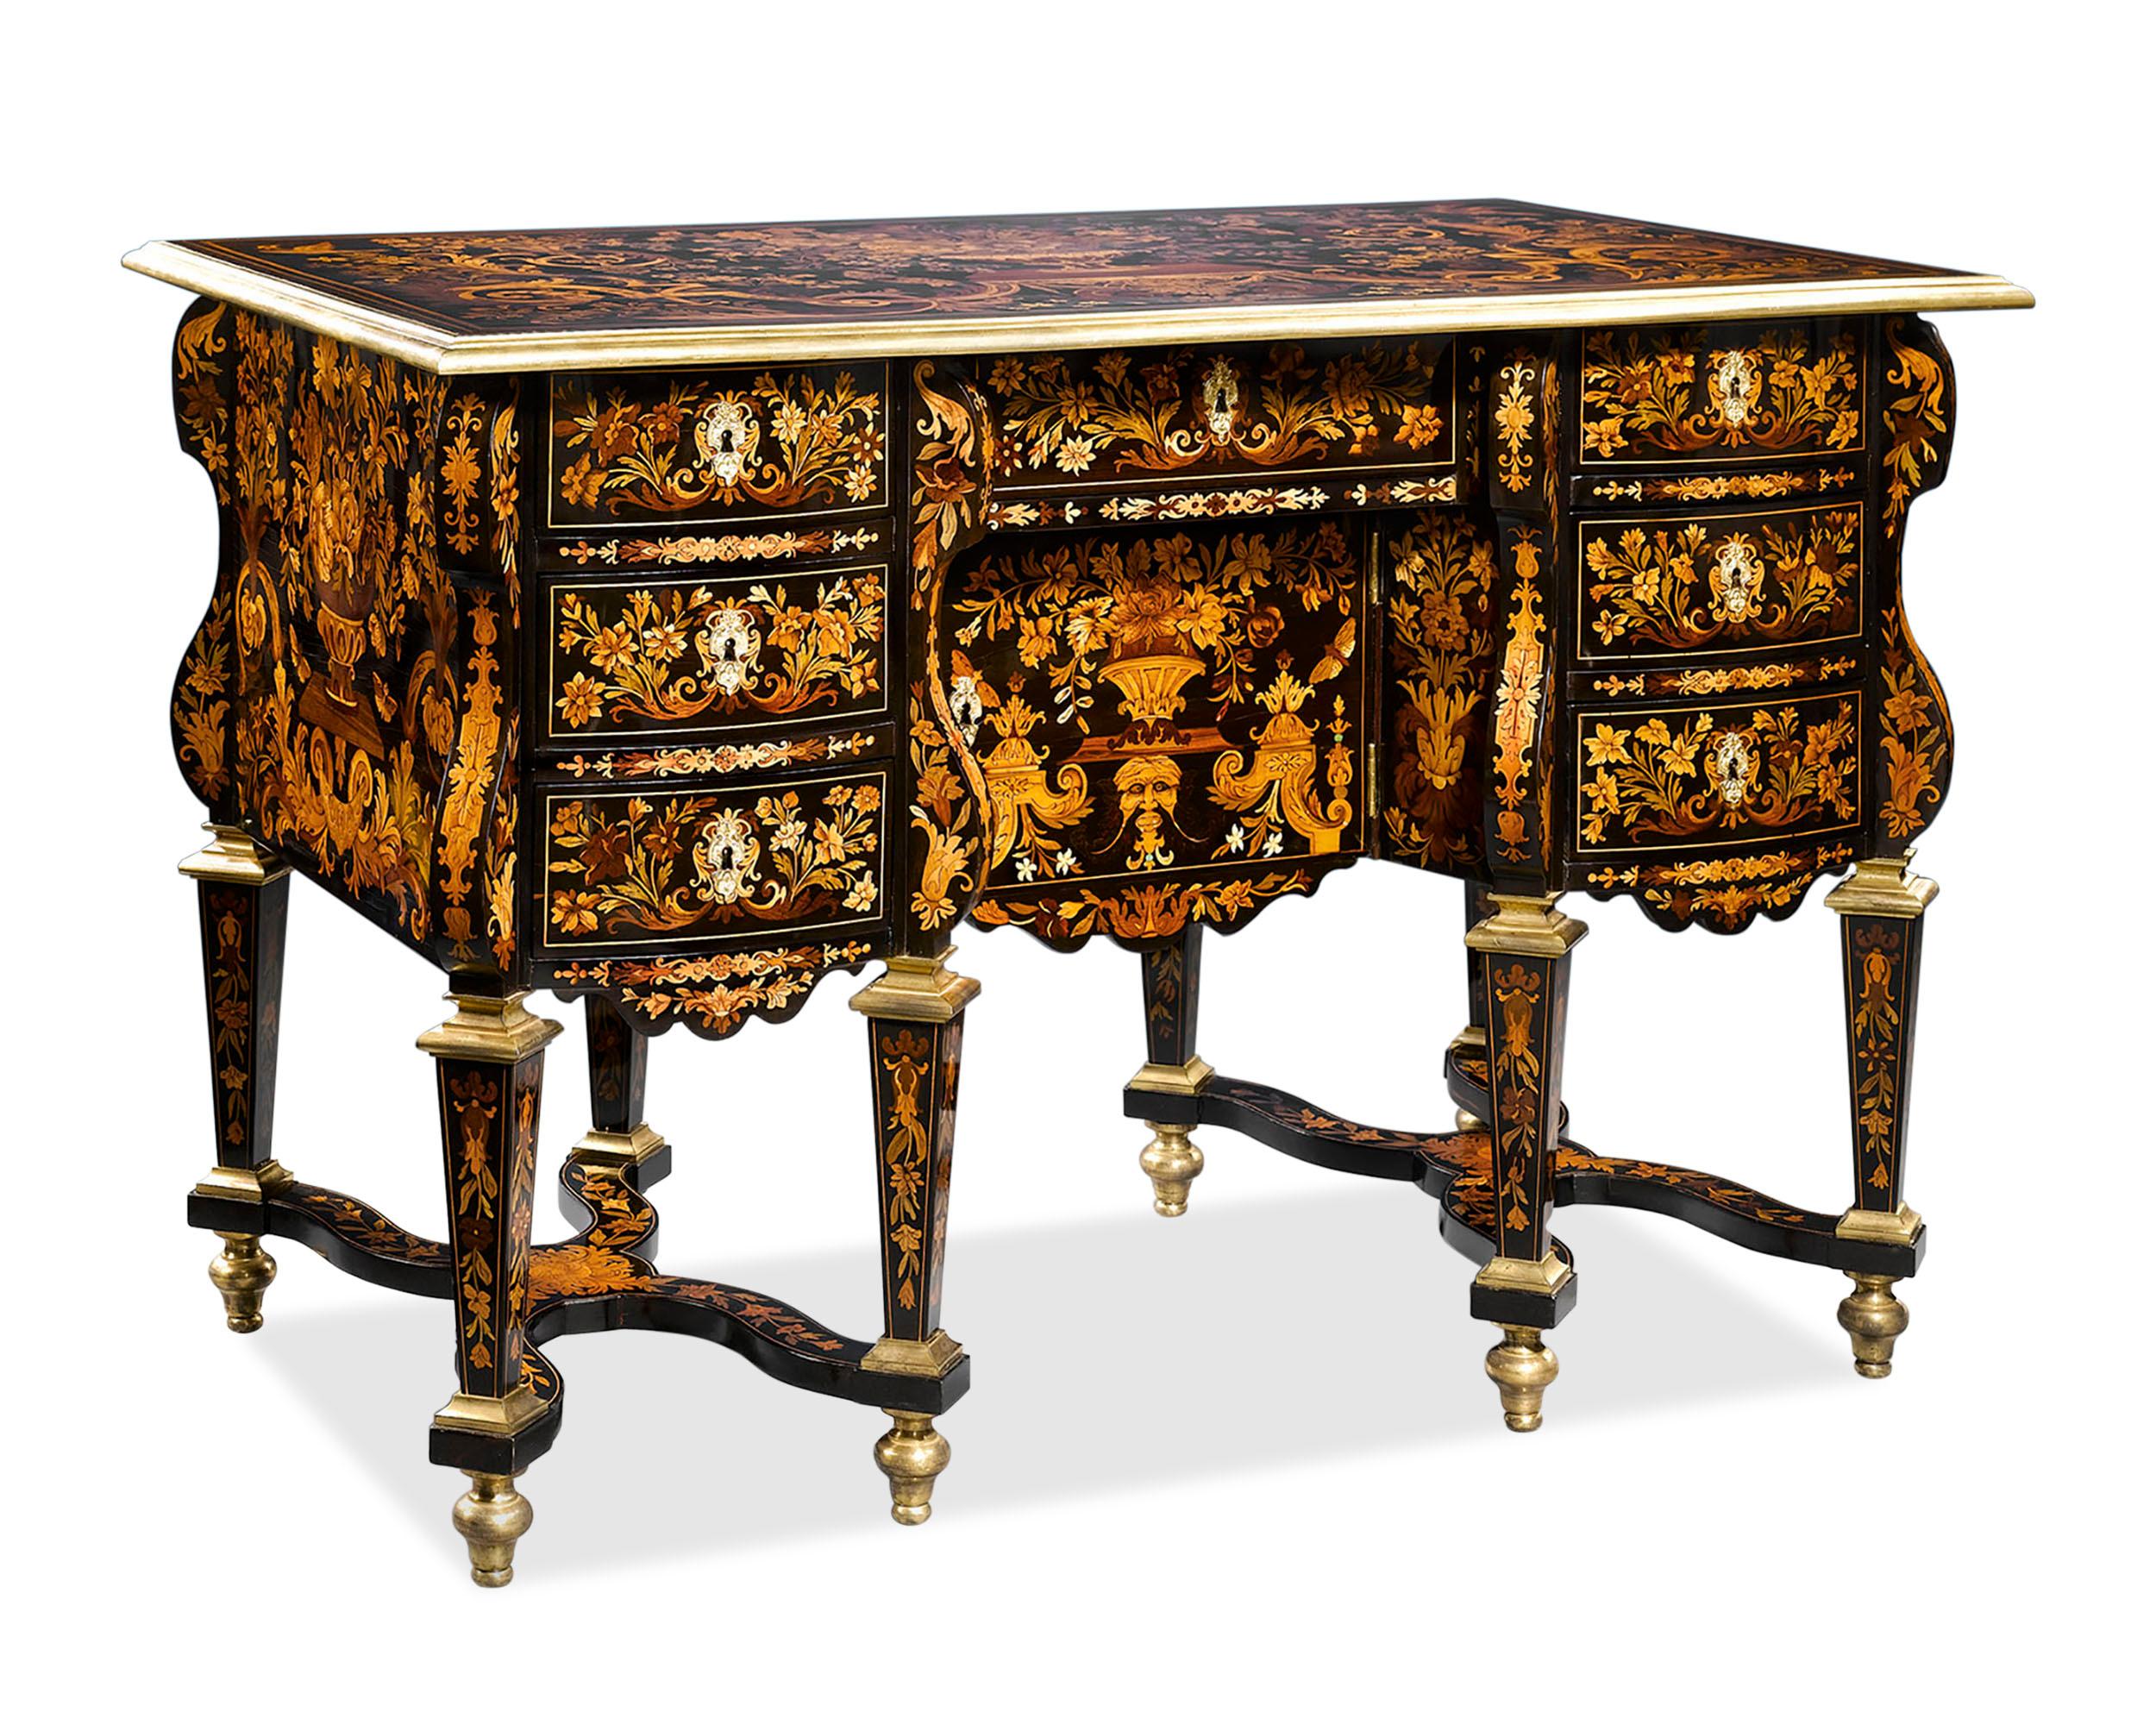 This masterfully crafted knee-hole desk, or bureau Mazarin, is attributed to Pierre Golle, one of the finest and most important French cabinetmakers of his age. It was once part of the famed Rothschild collection at Mentmore, which is said to have